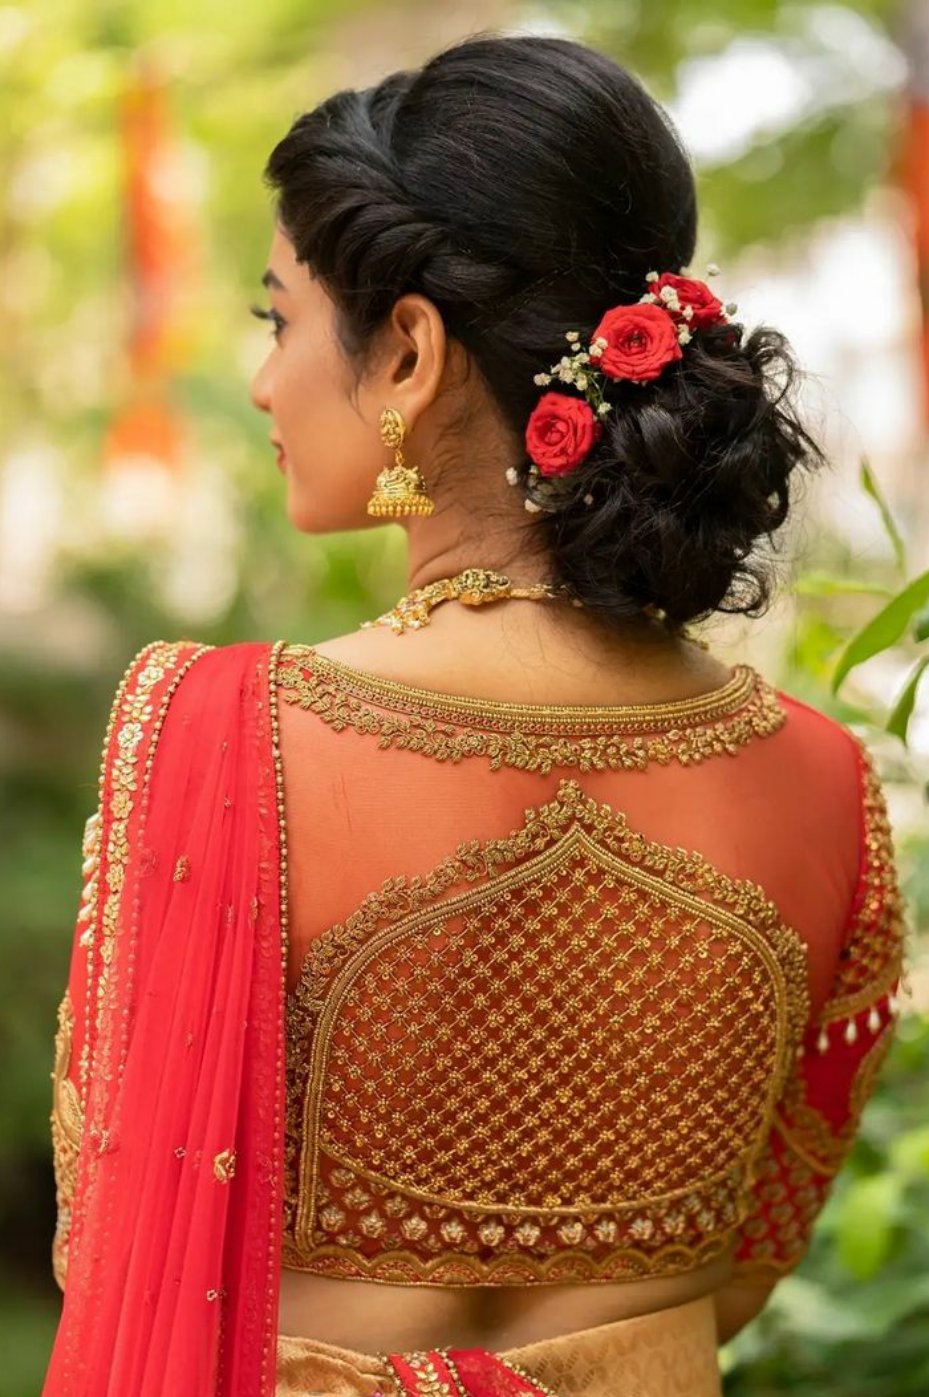 Traditional Half Saree Hairstyle Ideas - Latest Blouse Designs | Facebook